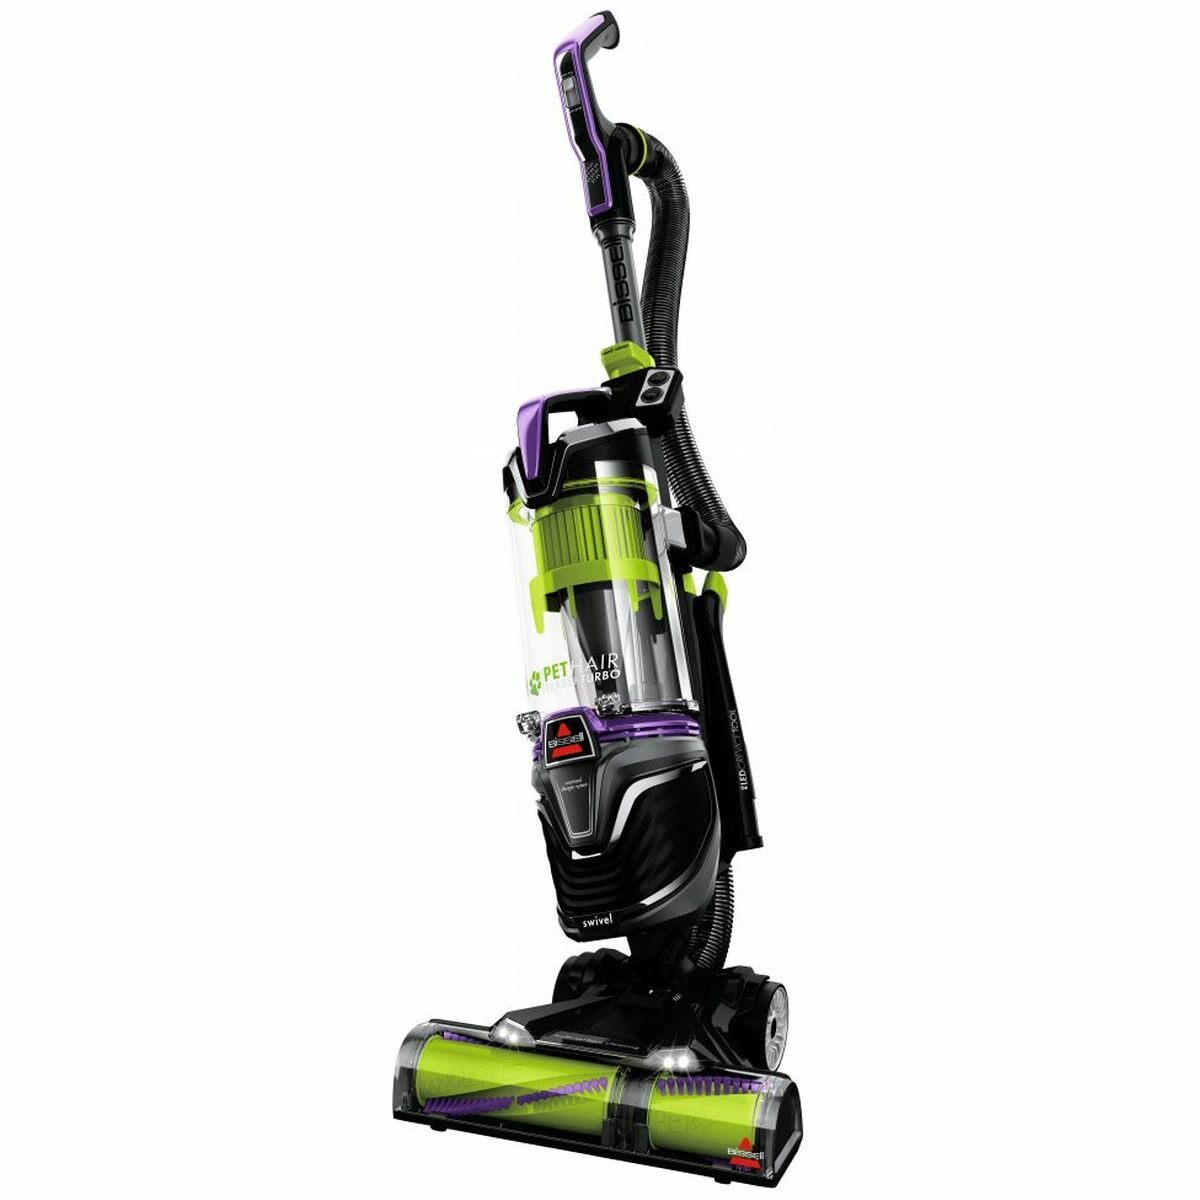 NEW Bissell Pet Hair Eraser Turbo Upright Vacuum Cleaner 2454F | eBay